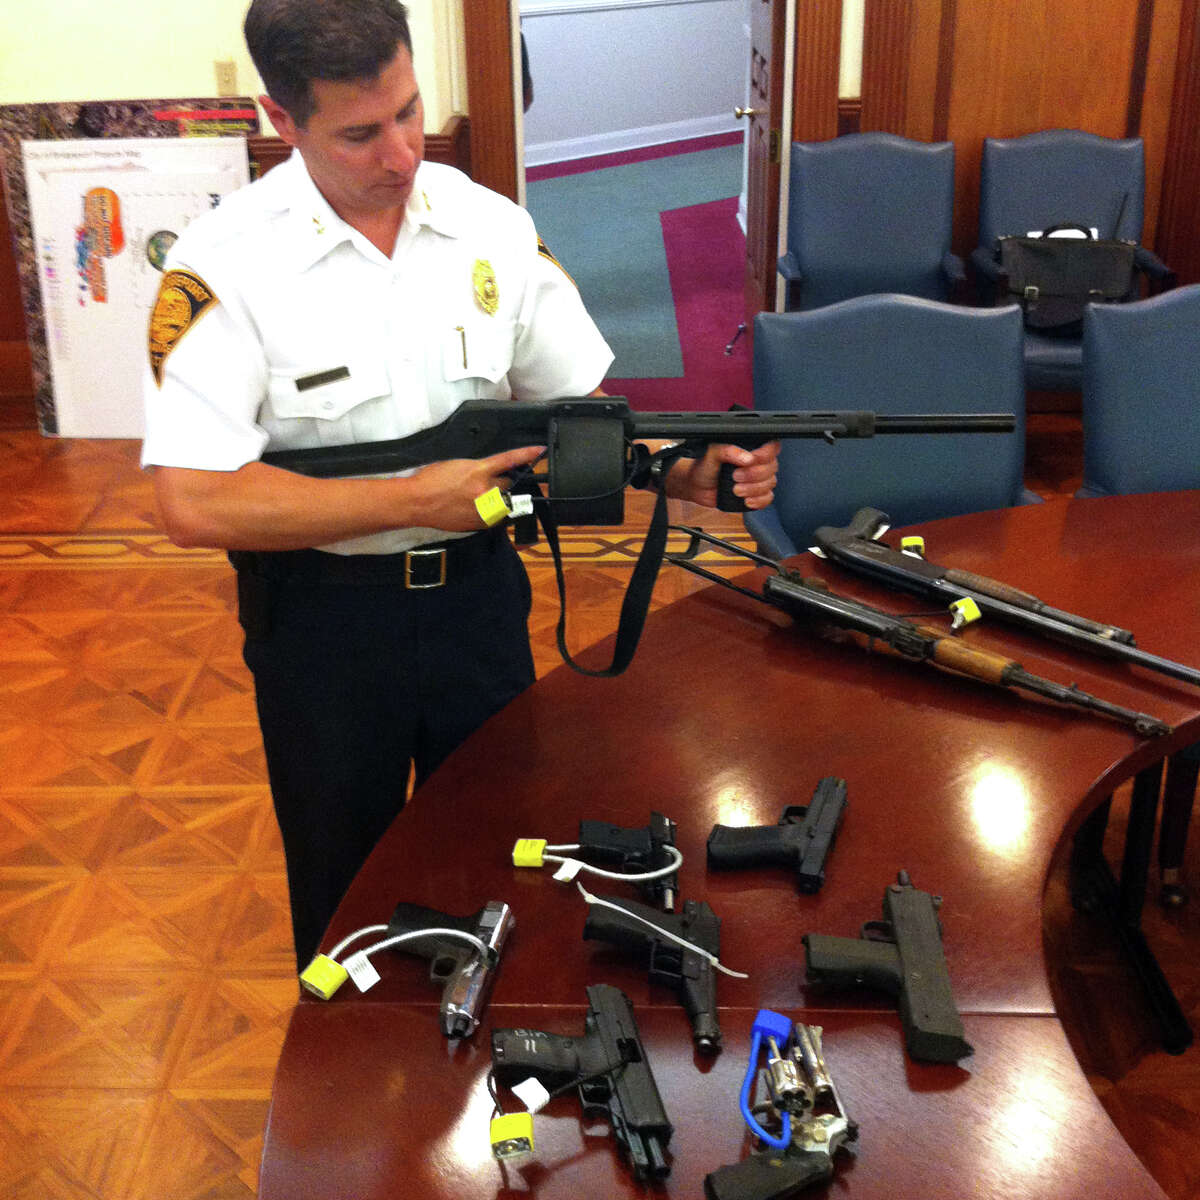 Bridgeport Assistant Police Chief James Nardozzi displays a Streetsweeper shotgun turned in during one of the cityâÄôs previous gun buyback programs.The department is hosting another buyback on Saturday and seeking financial support to help pay for the weapons.